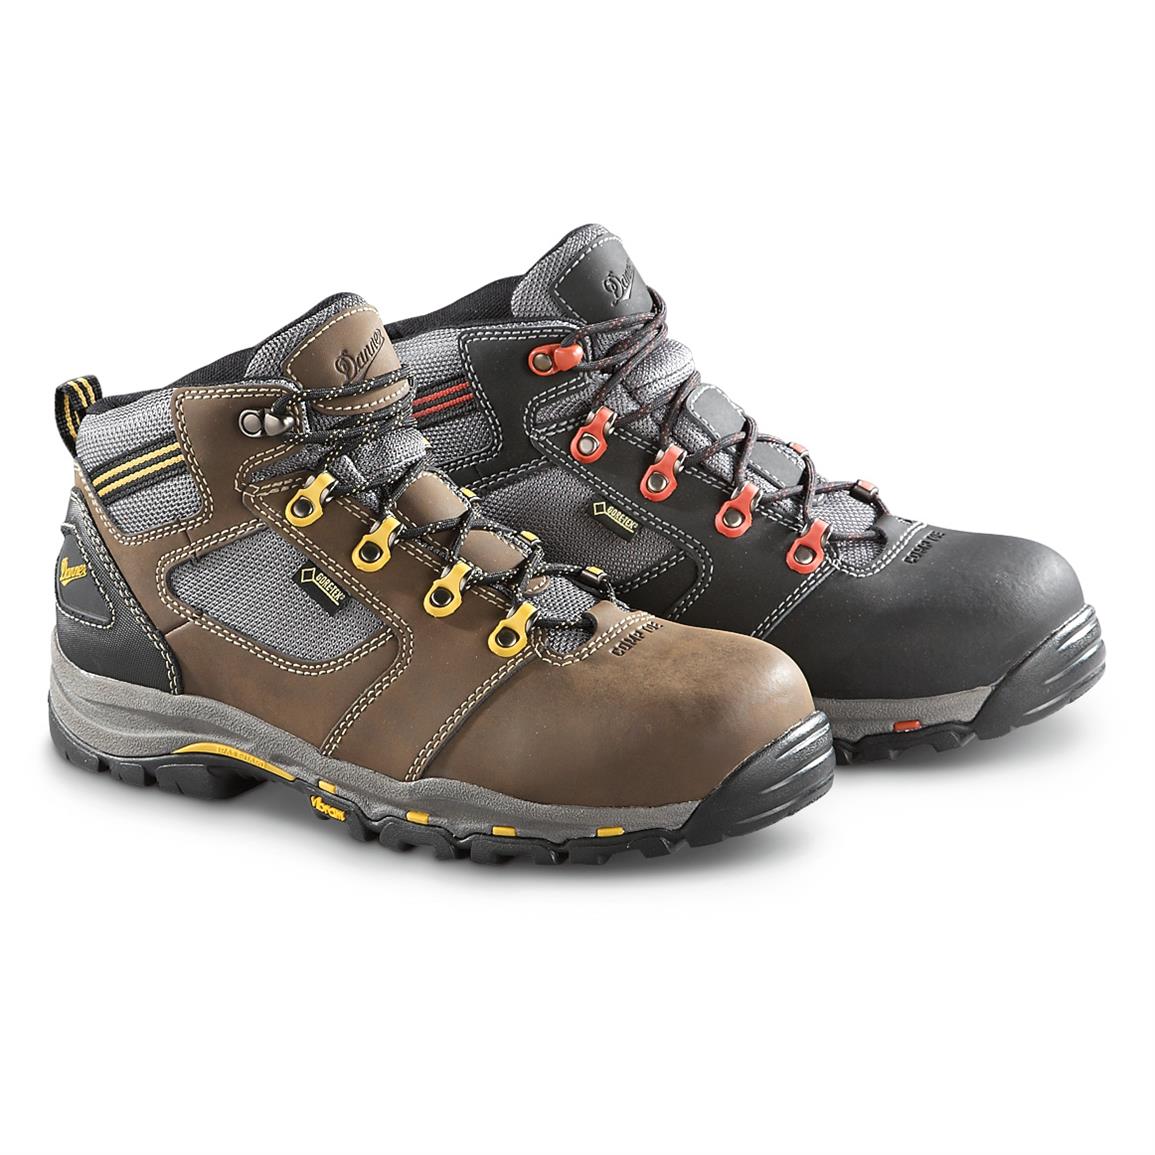 Danner Vicious GORE-TEX Waterproof Safety Toe Work Boots - 618679 ...